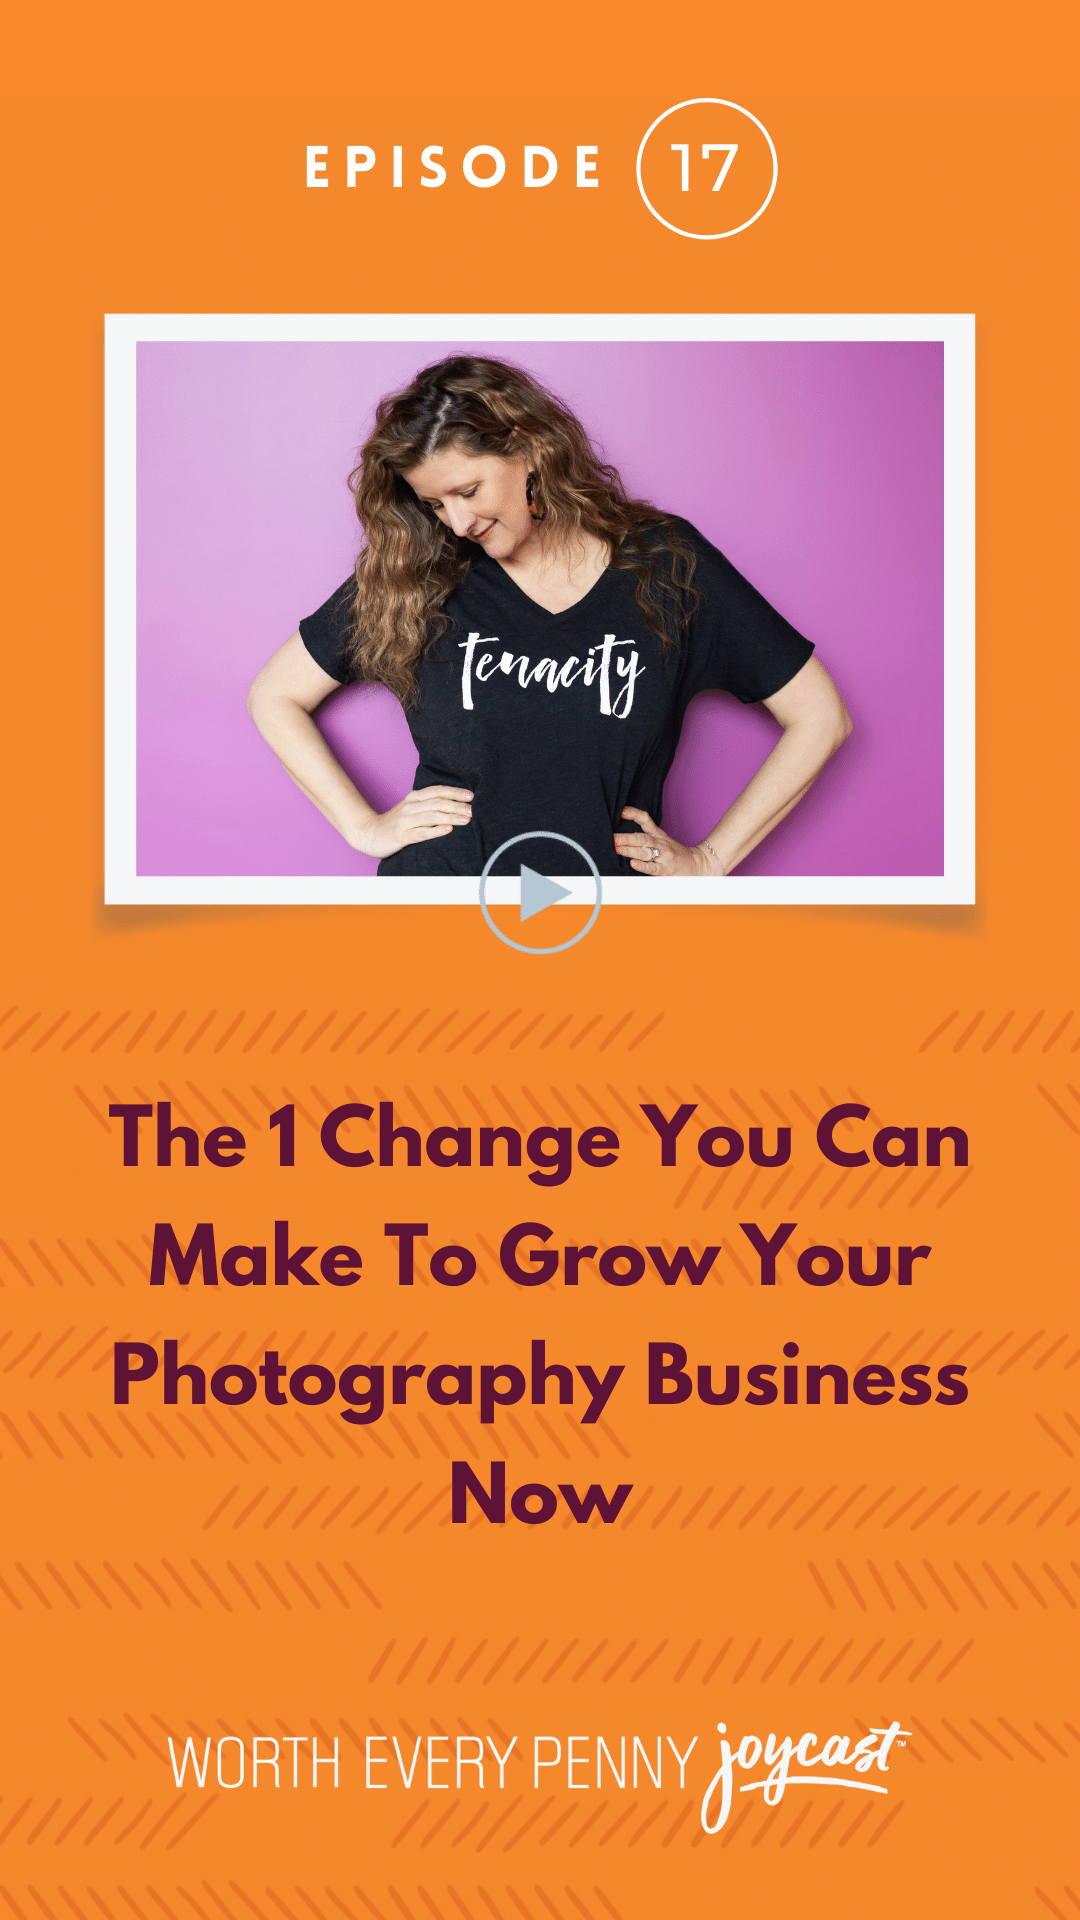 Episode 17: The 1 Change You Can Make to Grow Your Photography Business Now